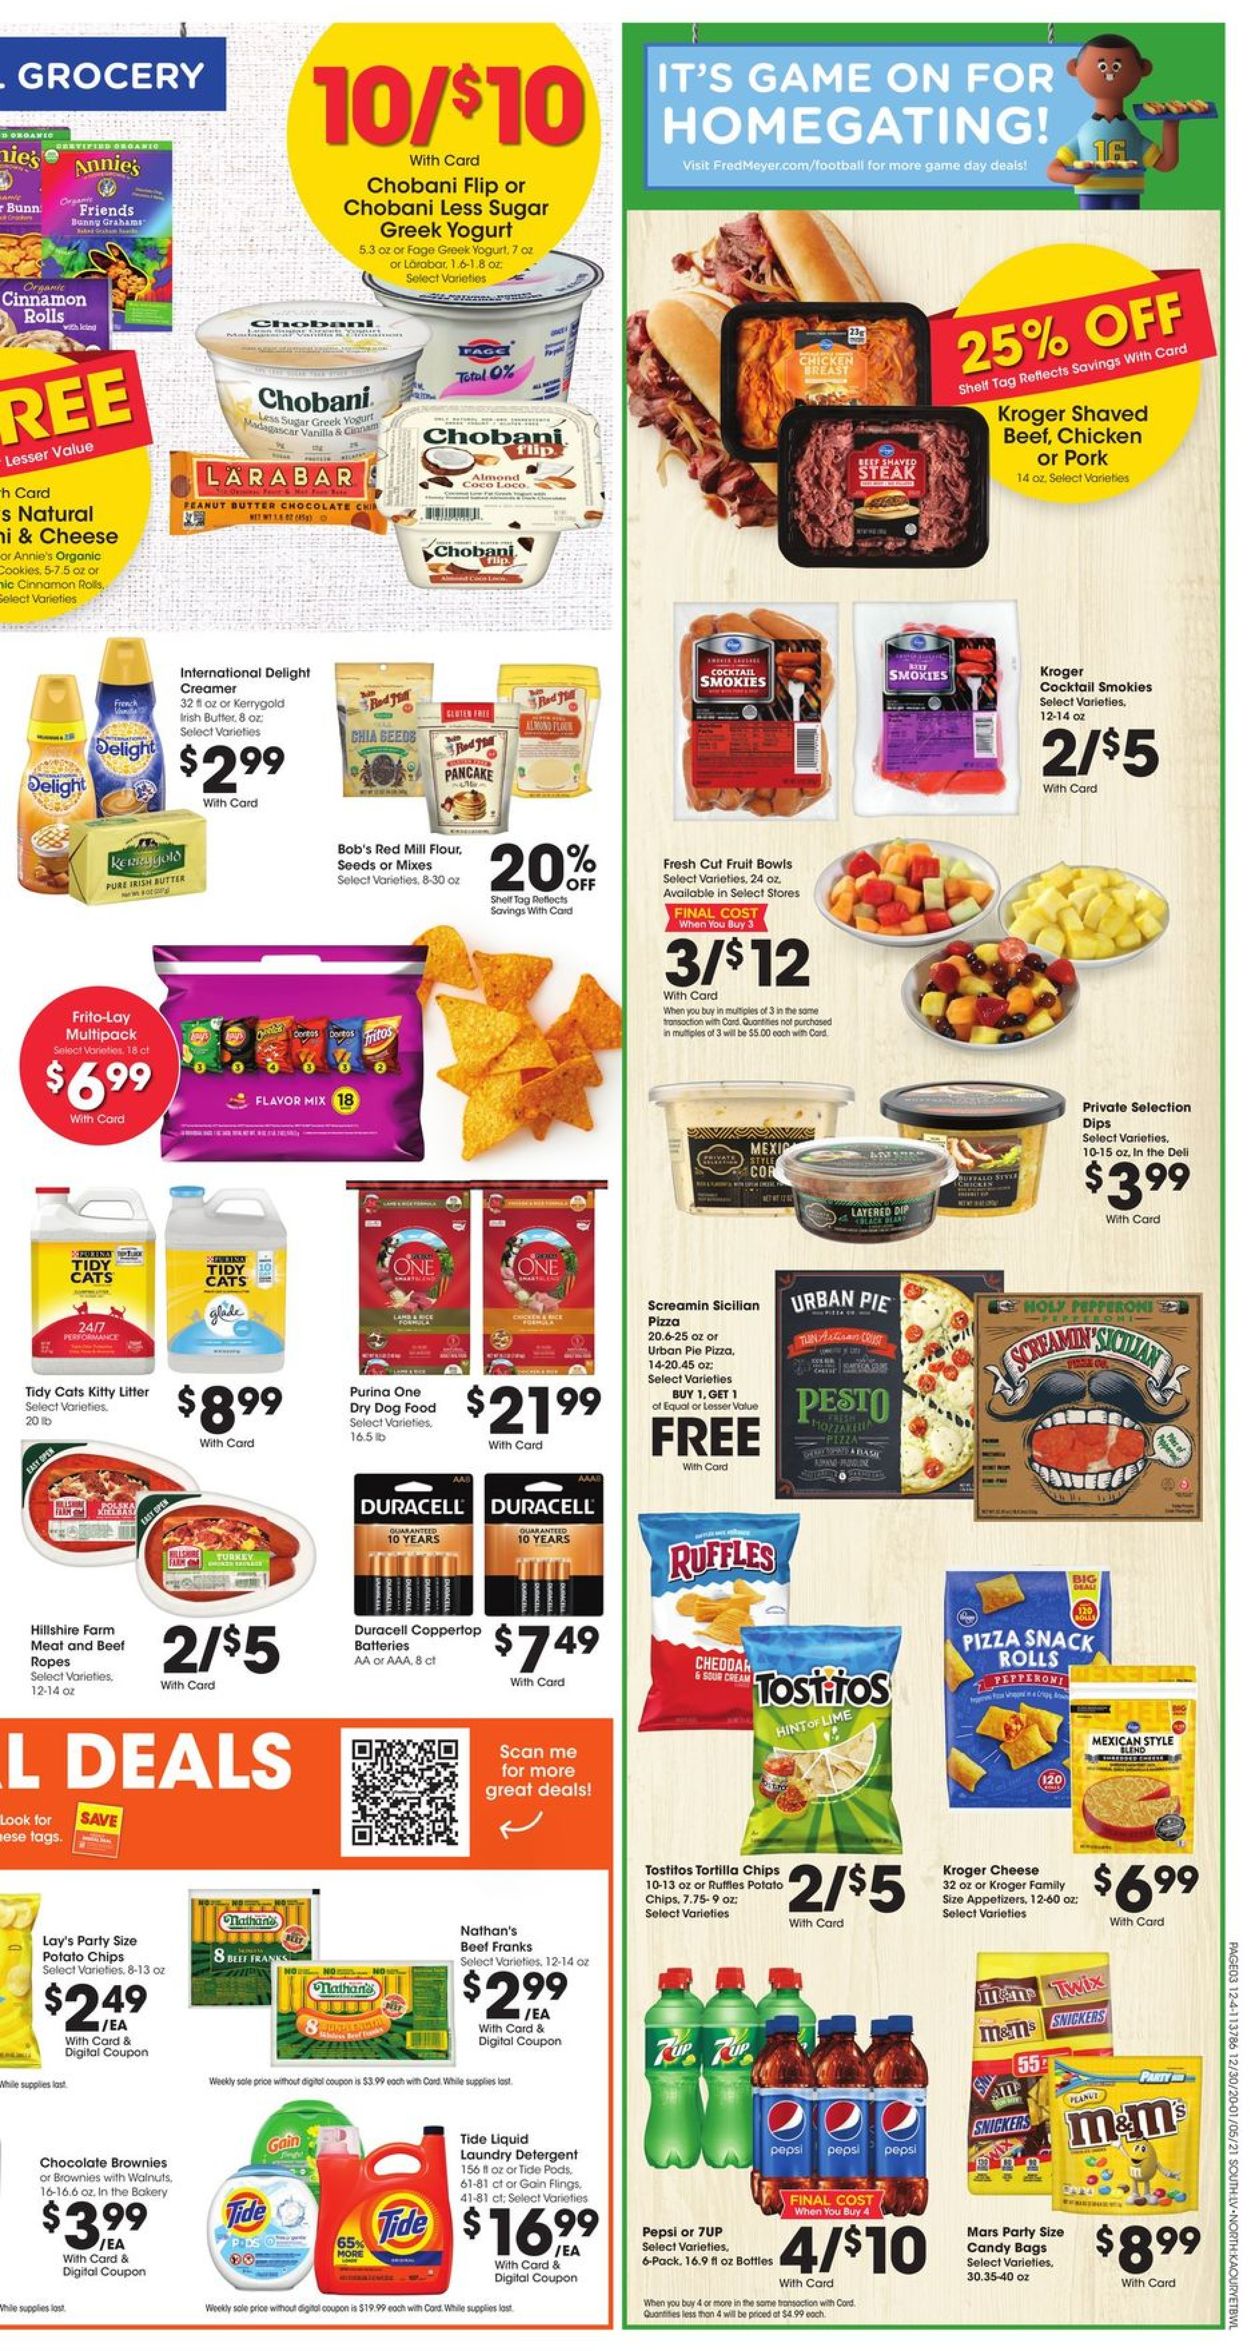 Fred Meyer Current weekly ad 12/30 - 01/05/2021 [3] - frequent-ads.com